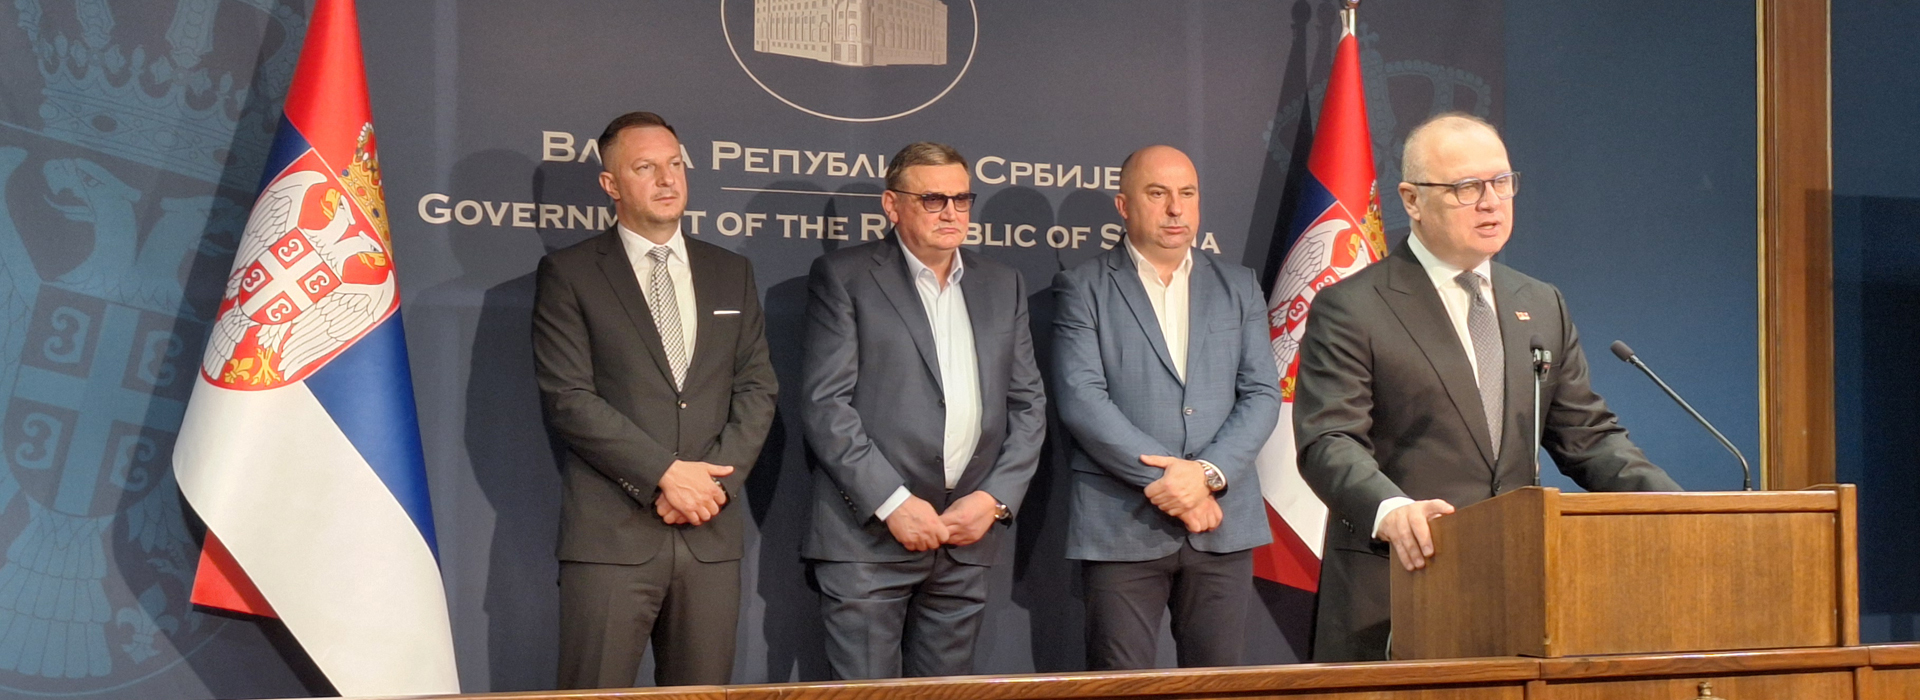 MEMORANDUM ON BUSINESS COOPERATION AND THE INTEGRATION OF THE ELECTRONIC TOLL COLLECTION SYSTEM BETWEEN SERBIA AND BOSNIA AND HERZEGOVINA SIGNED 